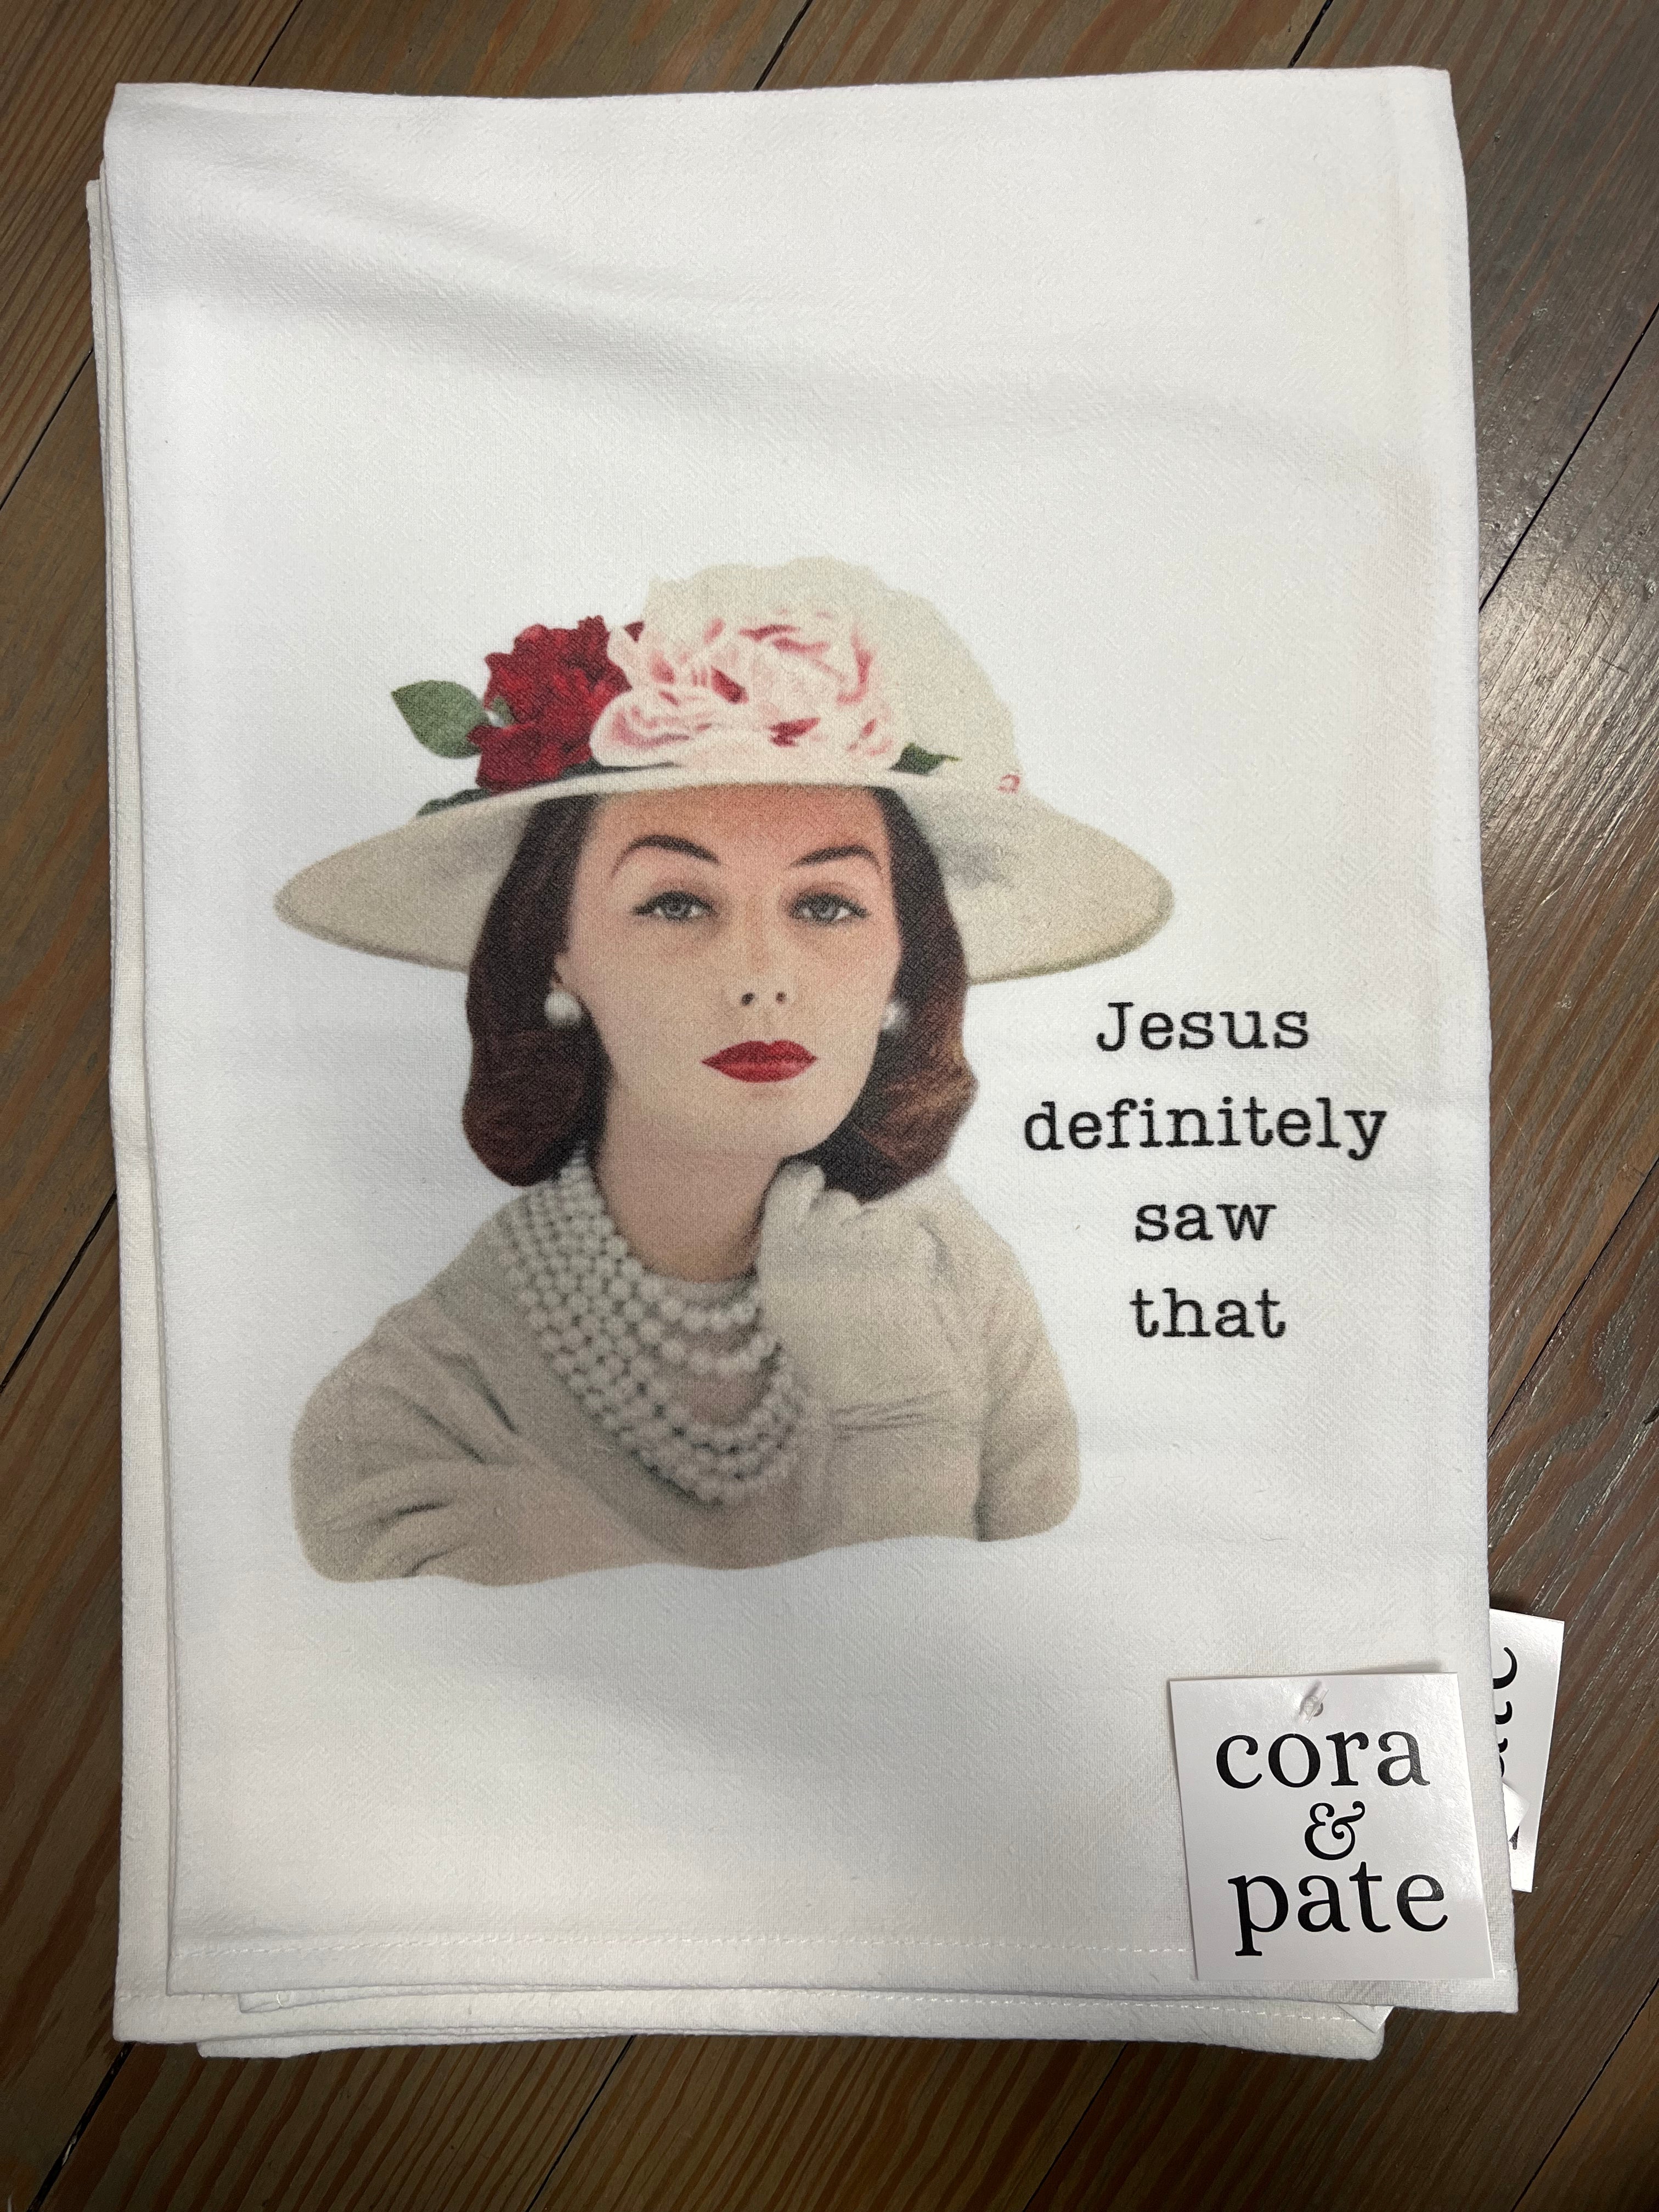 Southern Sisters Home tea towels